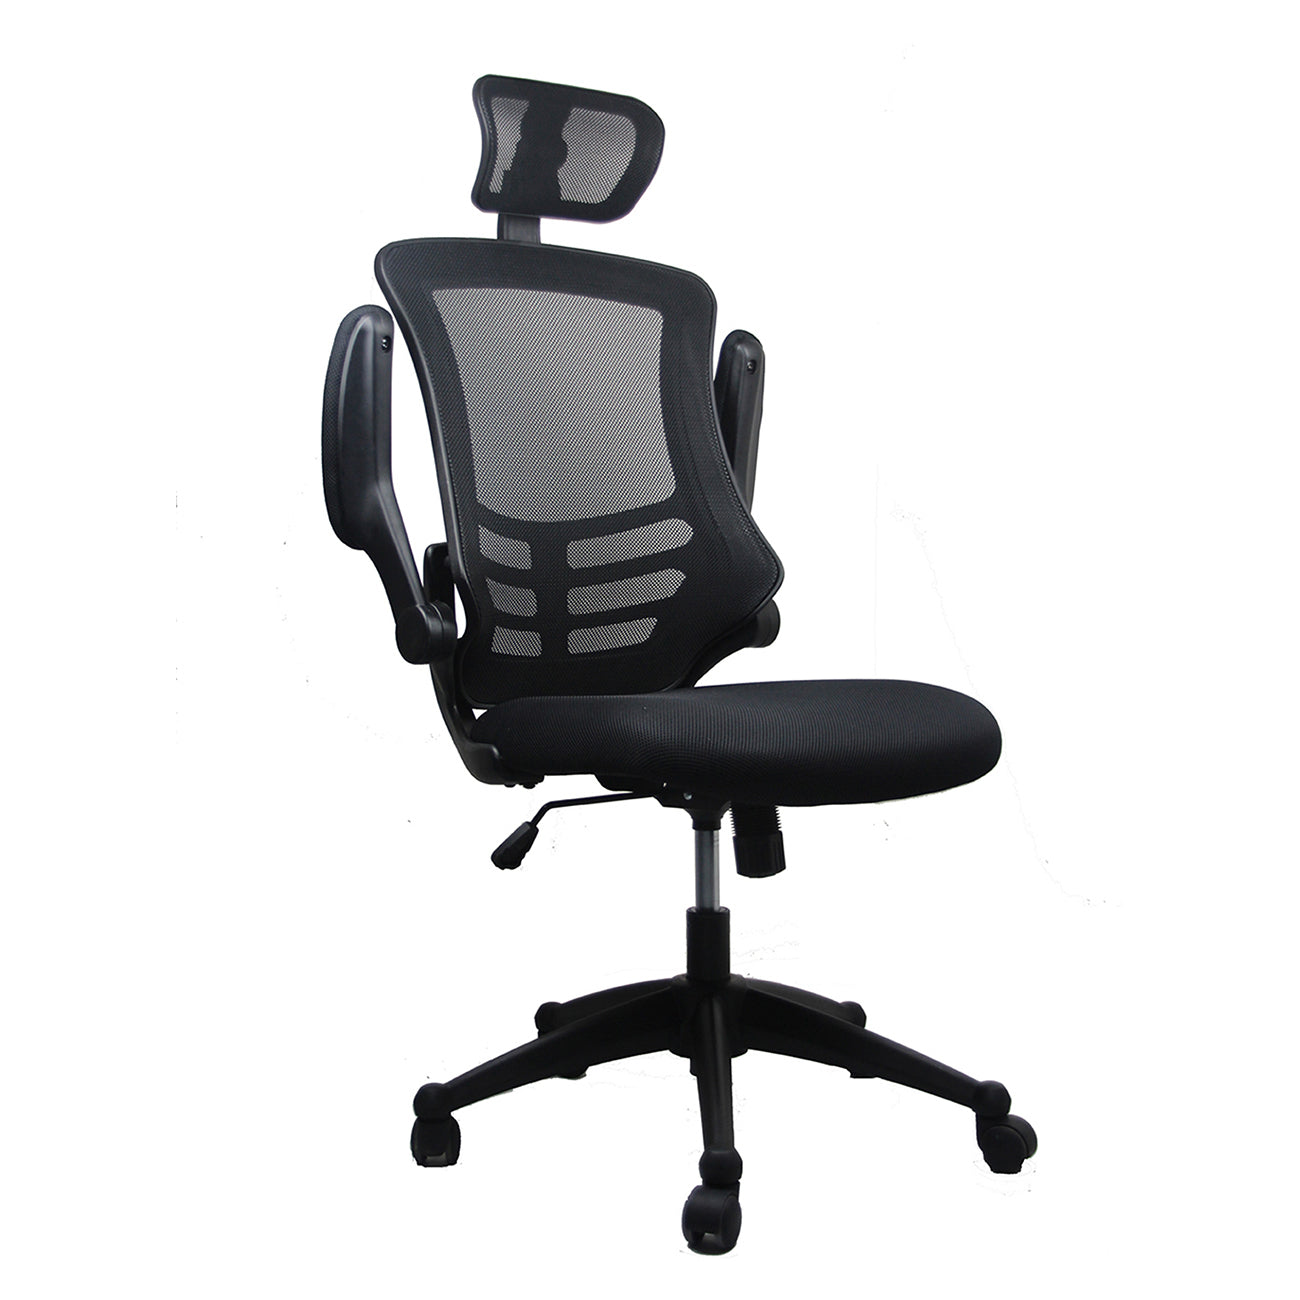 Techni Mobili Modern High-Back Mesh Executive Office Chair with Headrest and Flip-Up Arms, Black - Tonkn